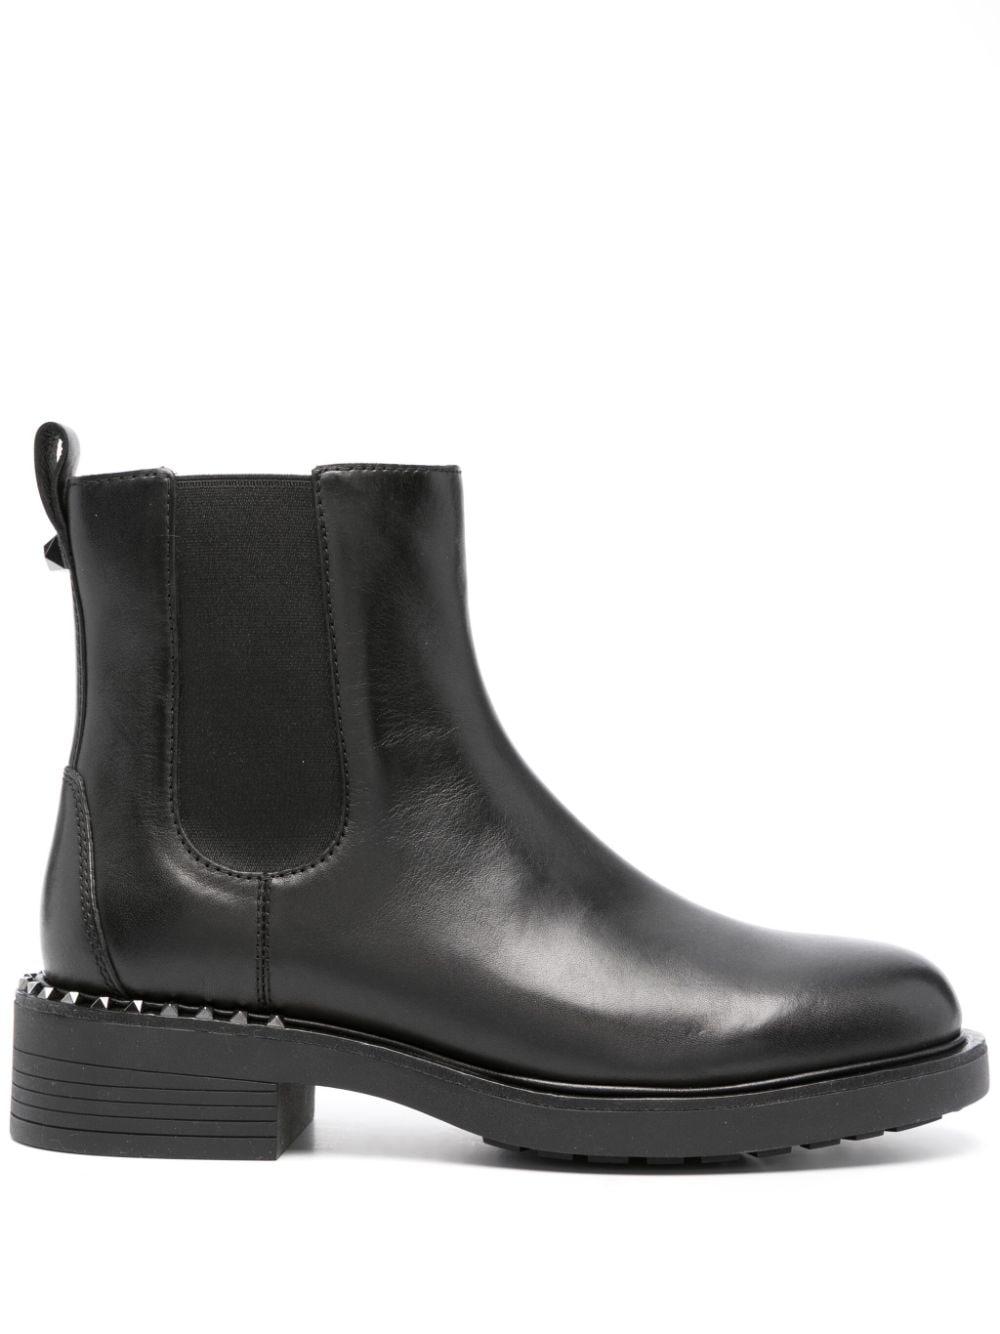 Ash Chelsea Boots in |